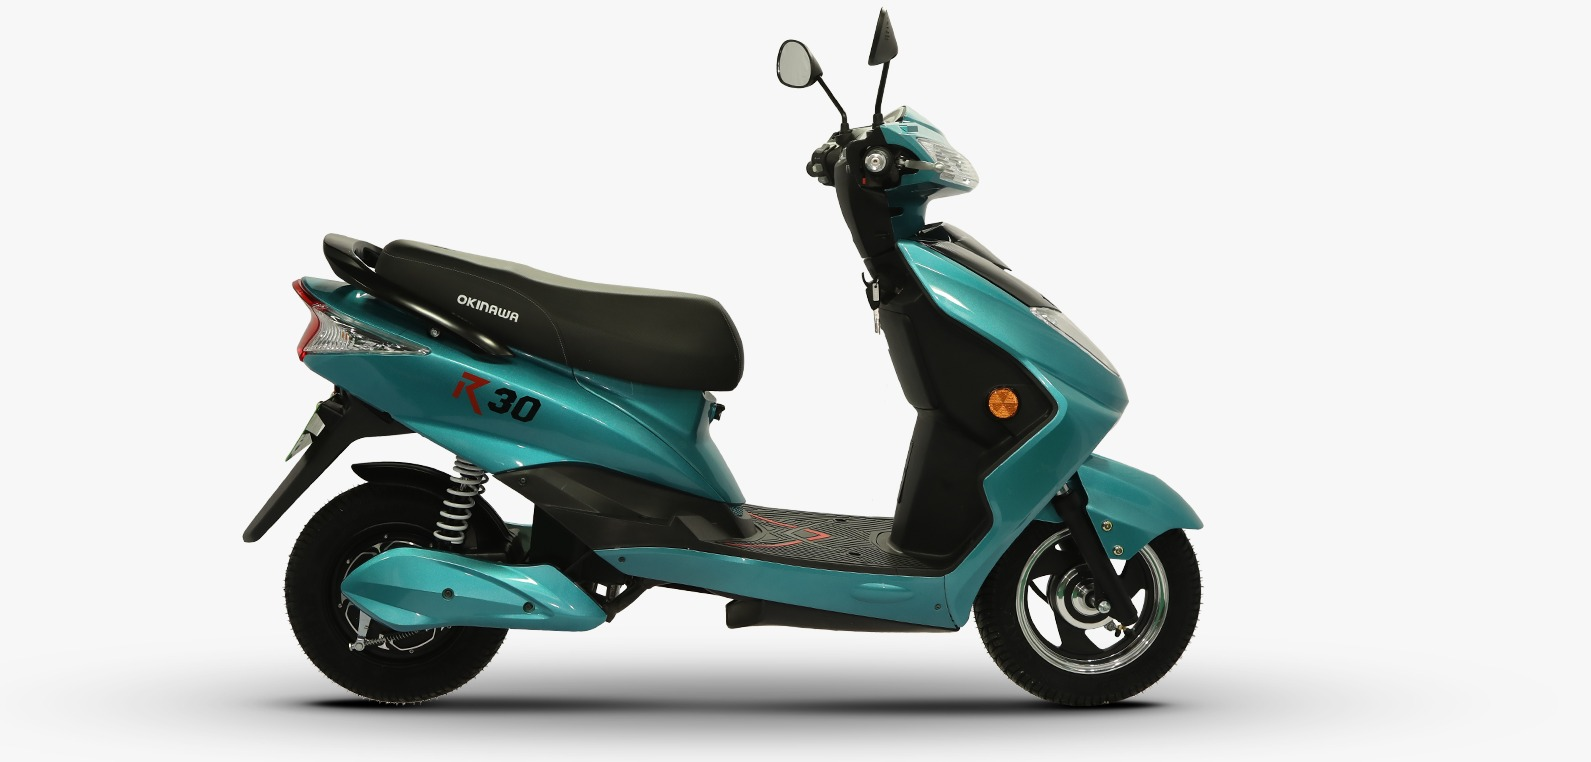 Okinawa R30 ev scooter know price features mileage